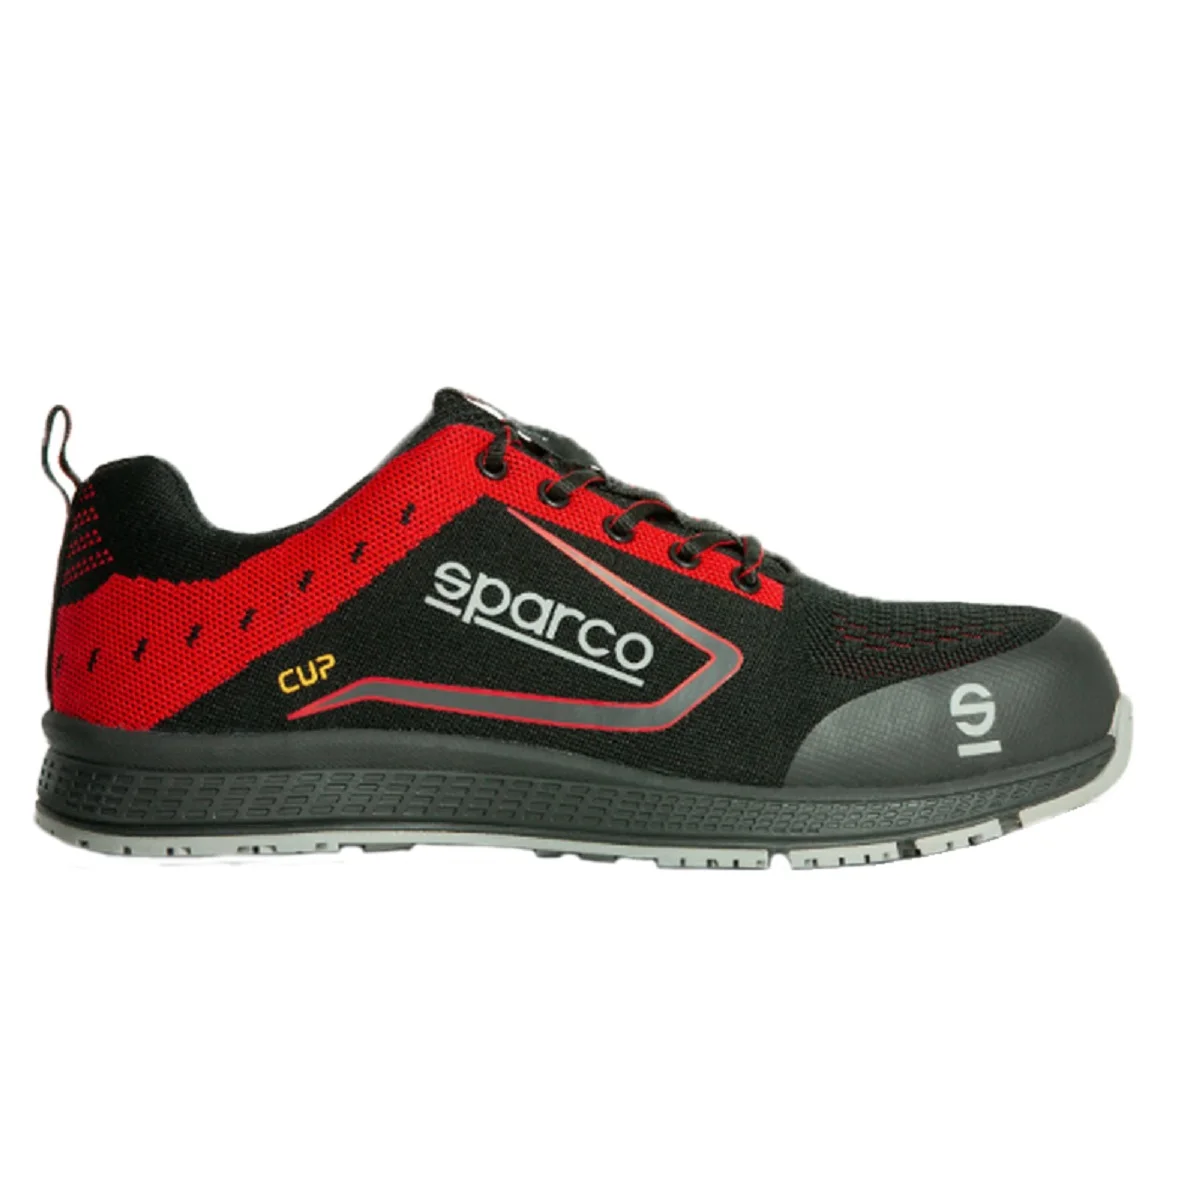 Safety shoes MAN-WOMAN Sparco NITRO S3 SRC Black and light Blue  ultra-lightweight style Running